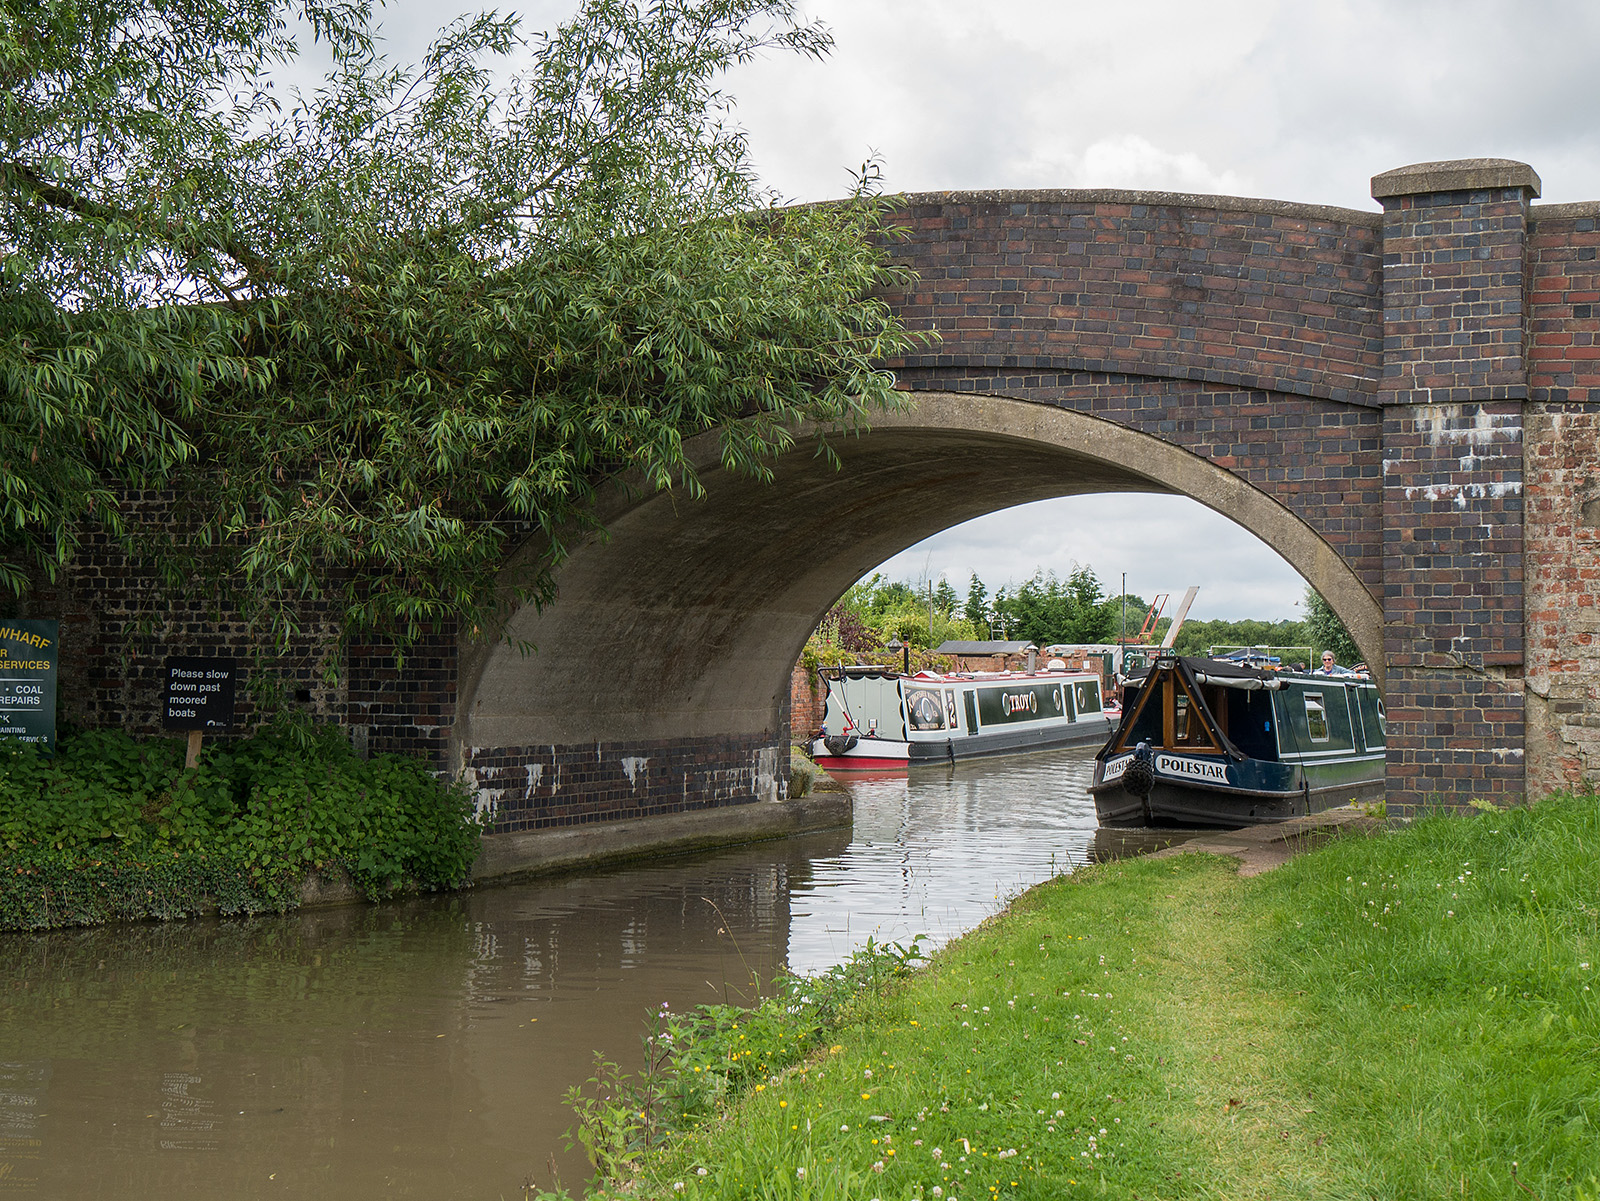 Bridge 60 and the approach to Yardley wharf